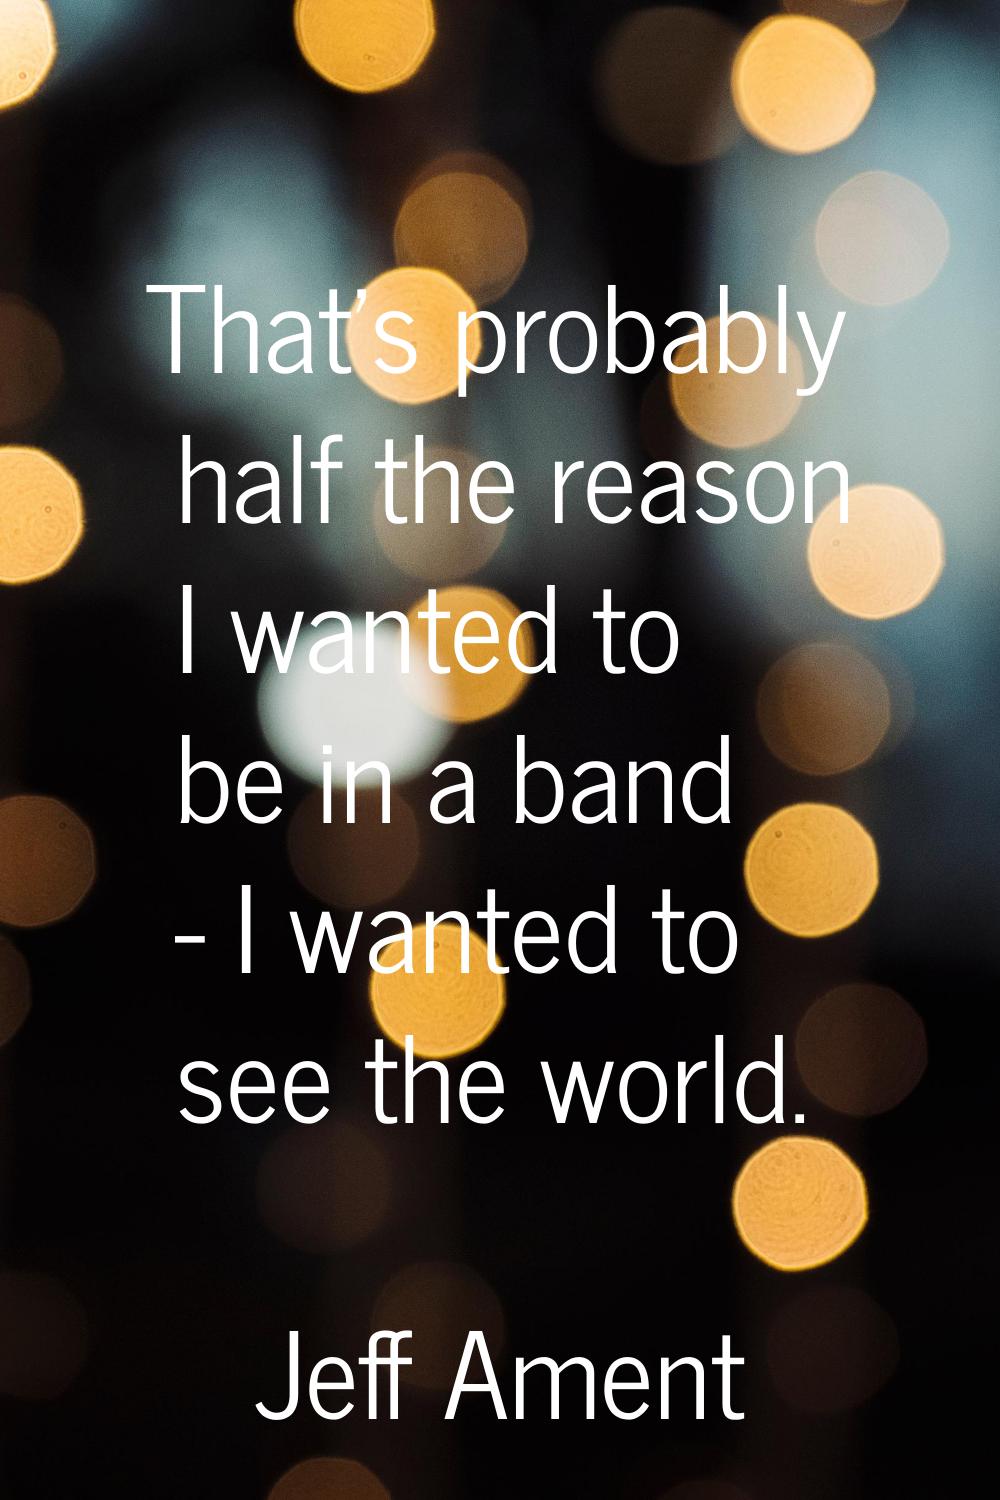 That's probably half the reason I wanted to be in a band - I wanted to see the world.